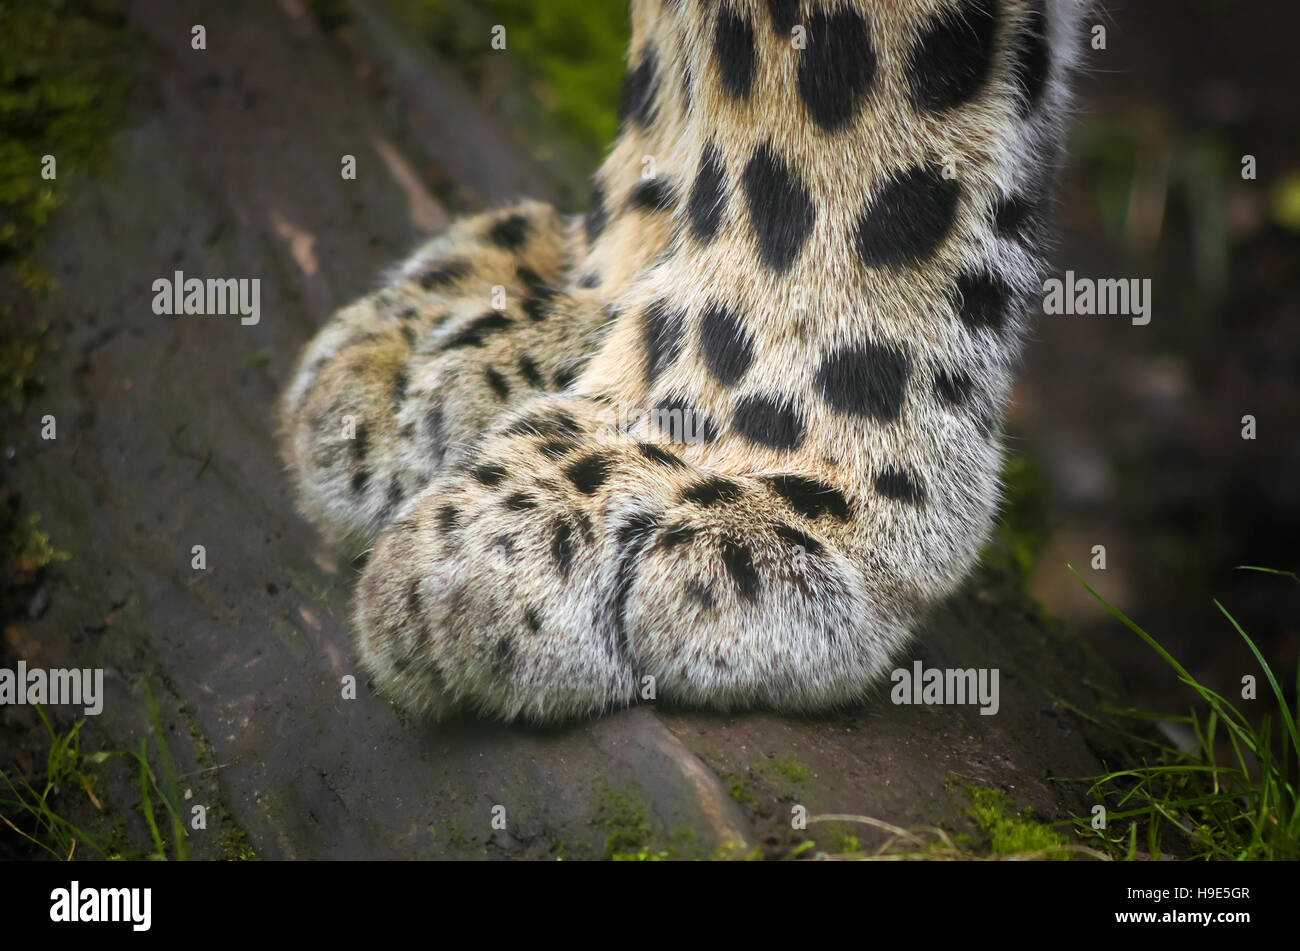 Close-up photo of a leopard's paw. Concept for a gentleness and softness combined with power. Stock Photo